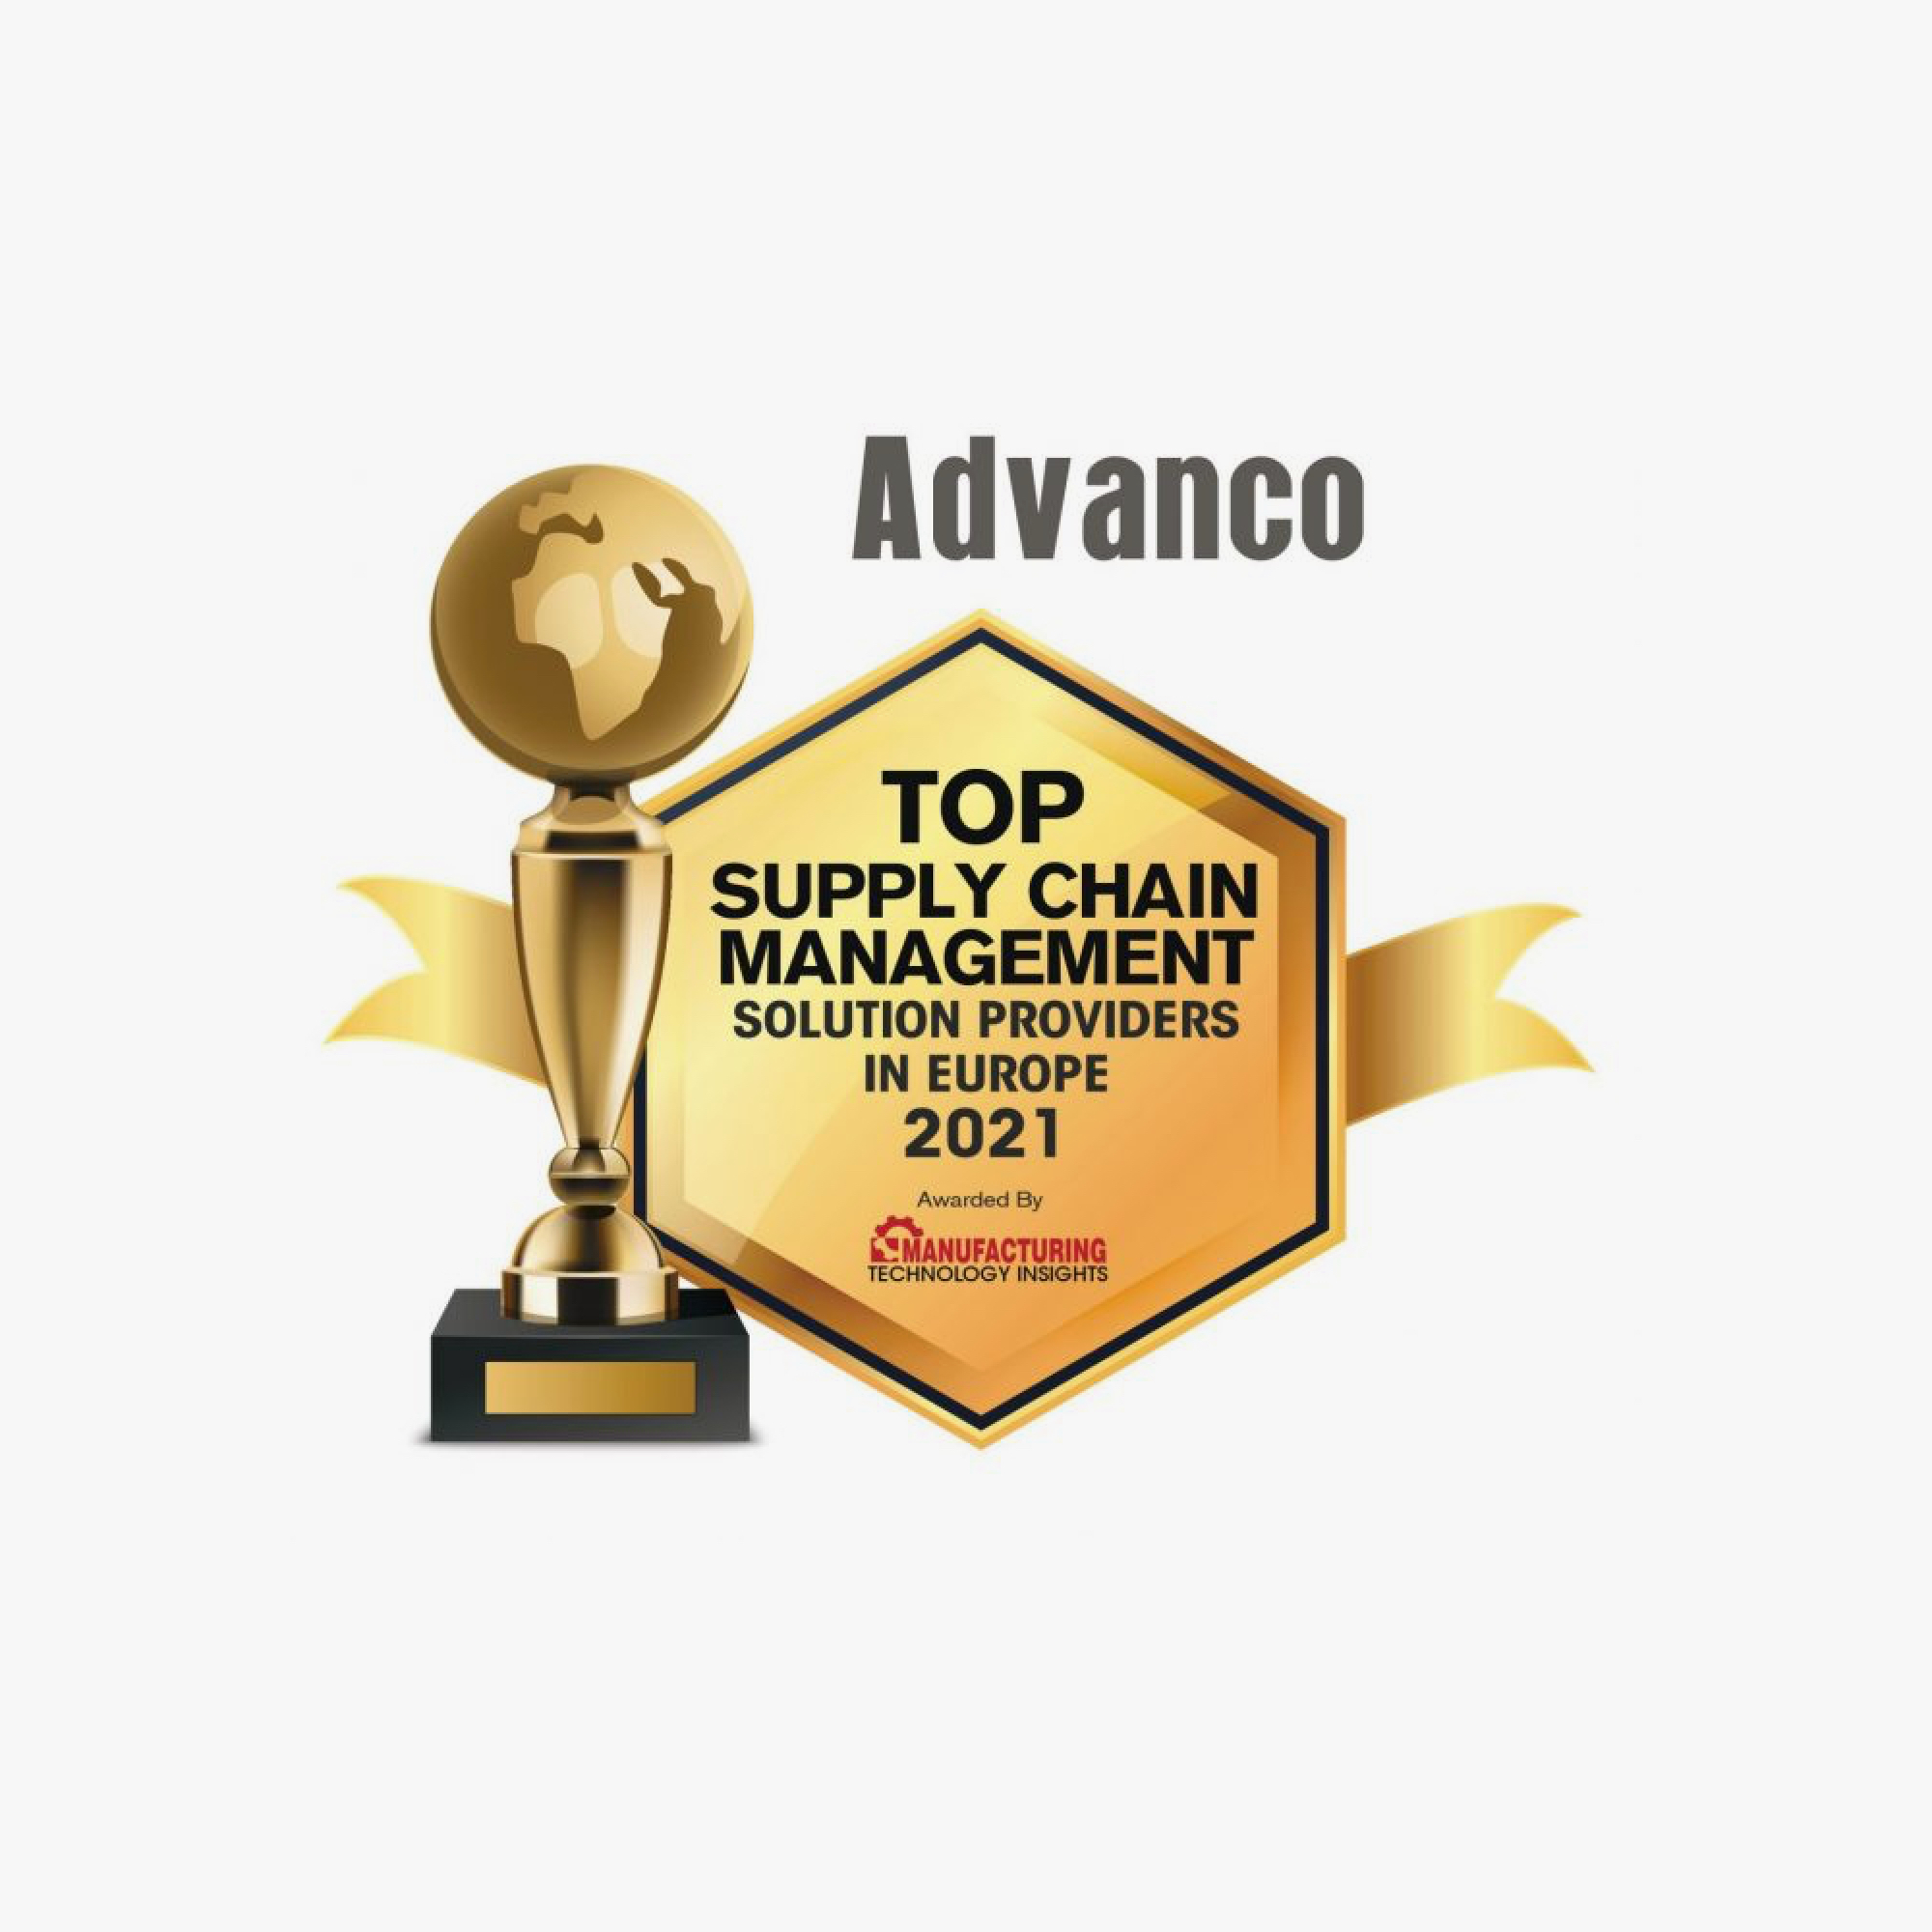 Advanco is one of the “Top Supply Chain Management Solution Providers” in Europe 2021